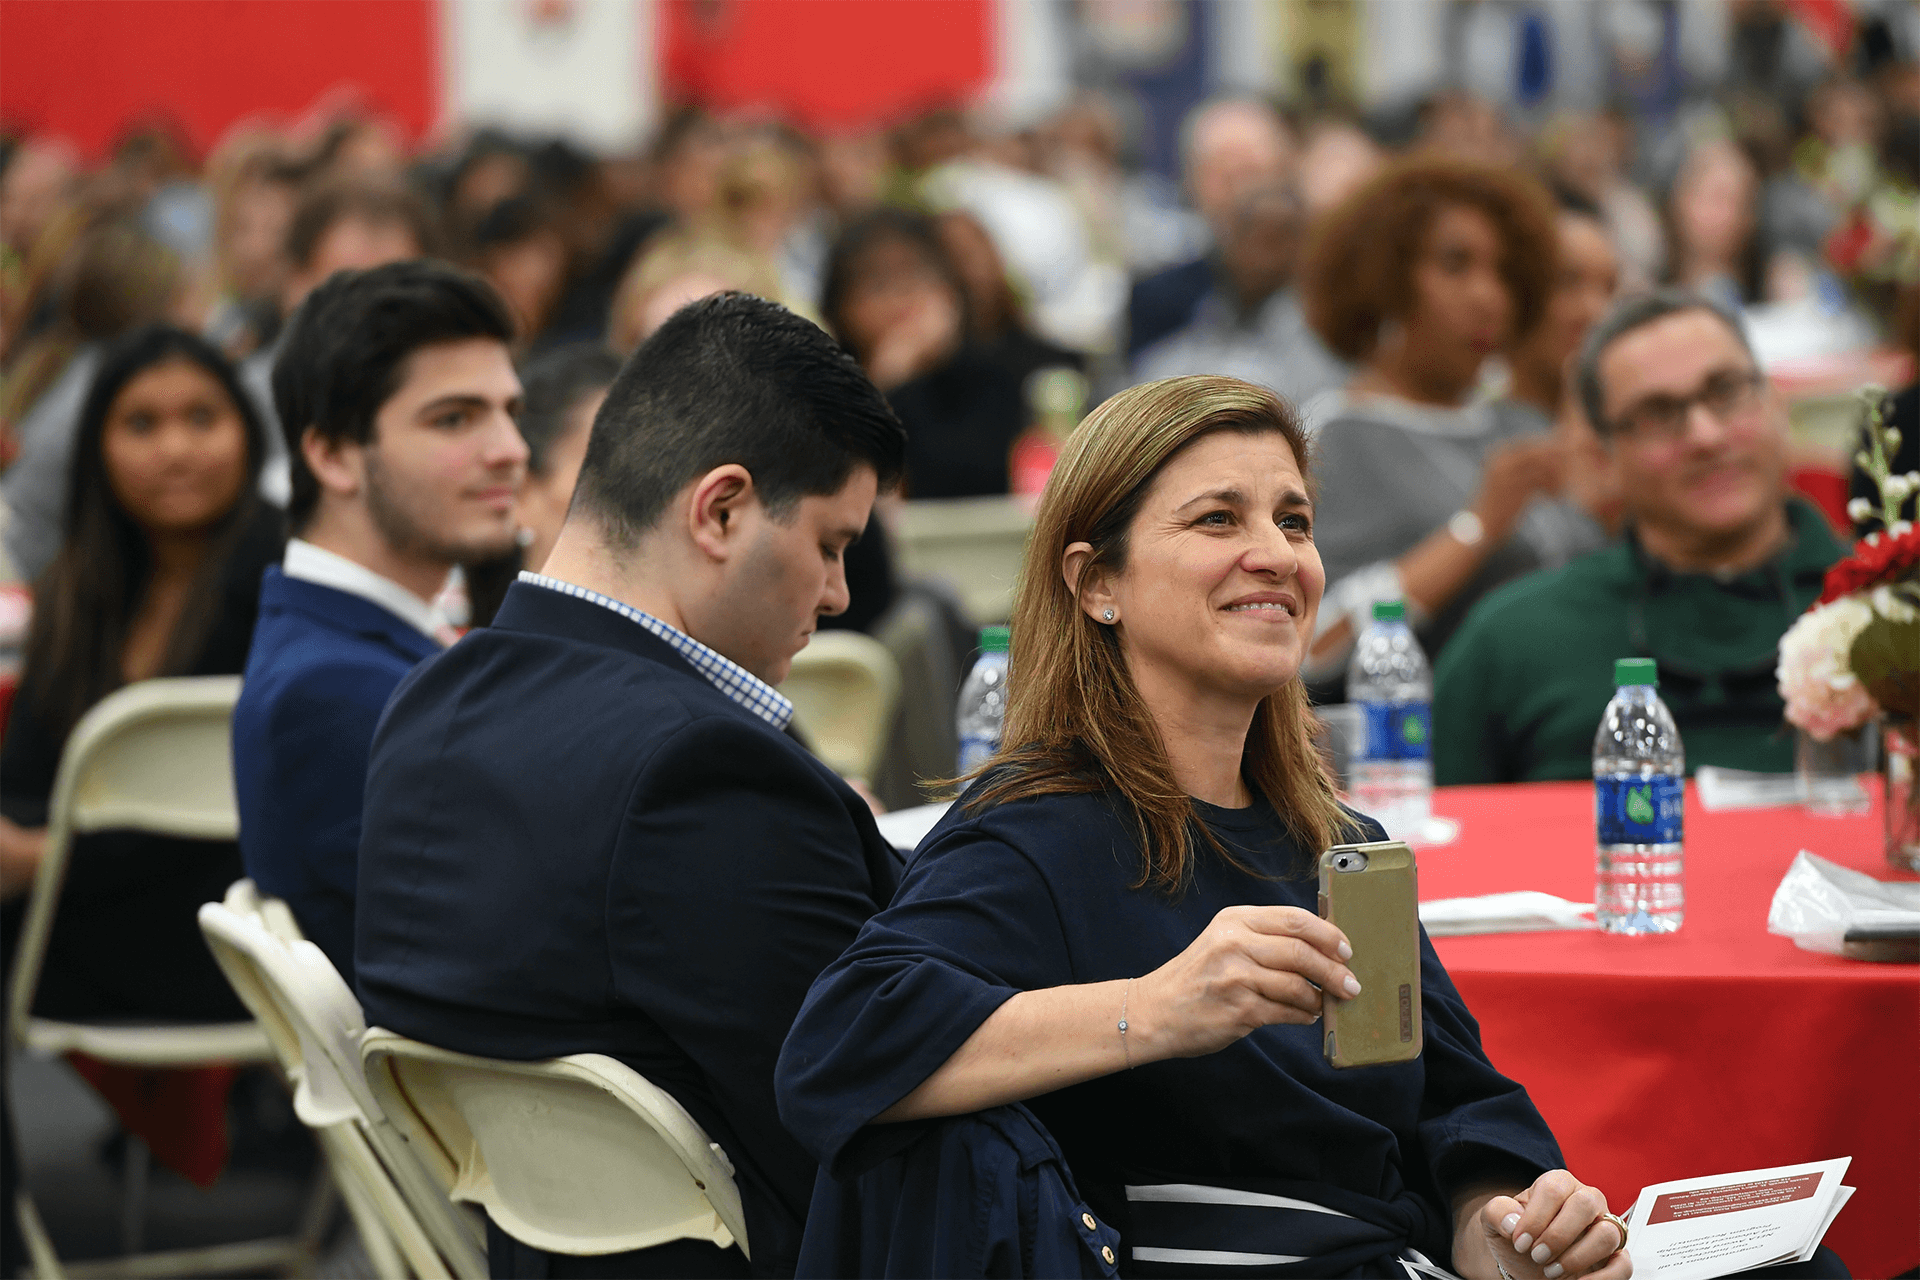 NSLS member smiling with a phone in her hand at an event